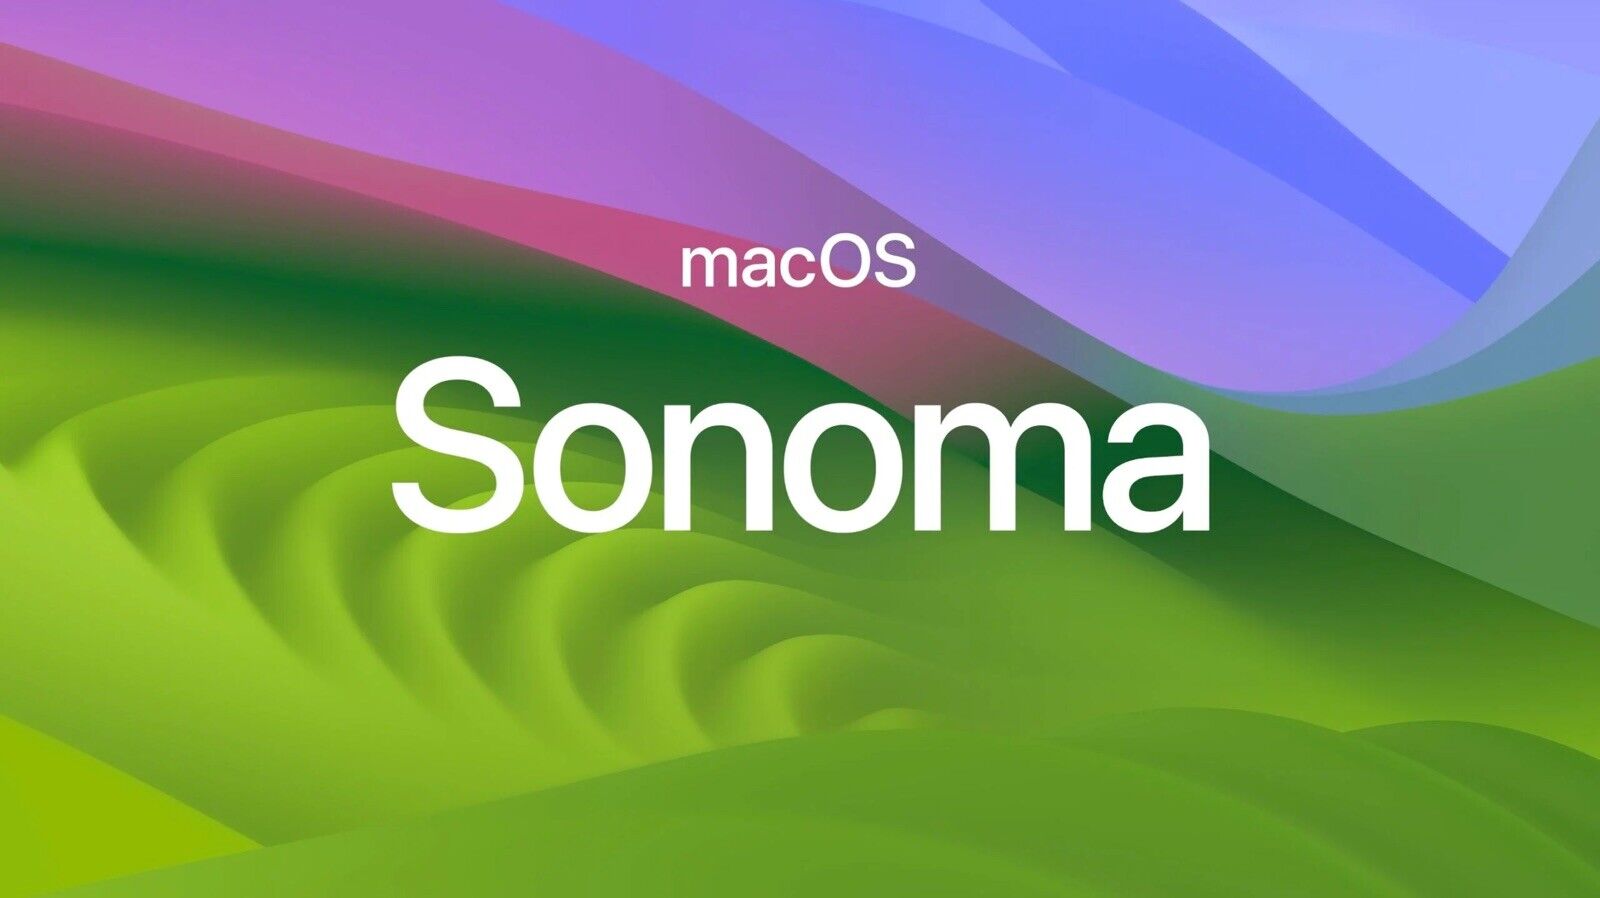 MacOS Bootable USB Sonoma (14.4.1) Installer Restore/Recovery Drive